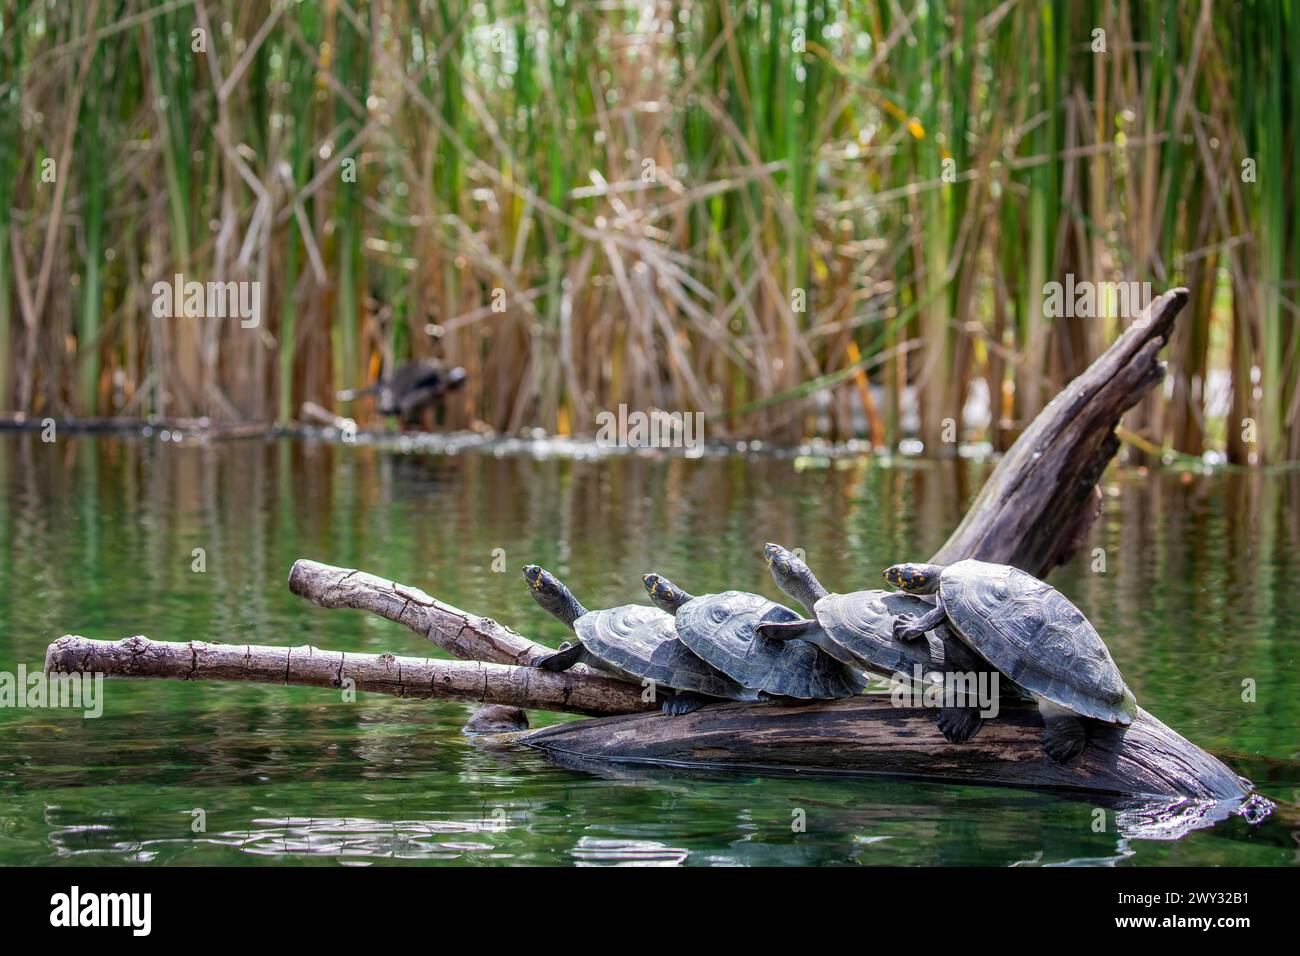 The yellow-spotted Amazon river turtle(Podocnemis unifilis).   One of the largest South American river turtles. Stock Photo